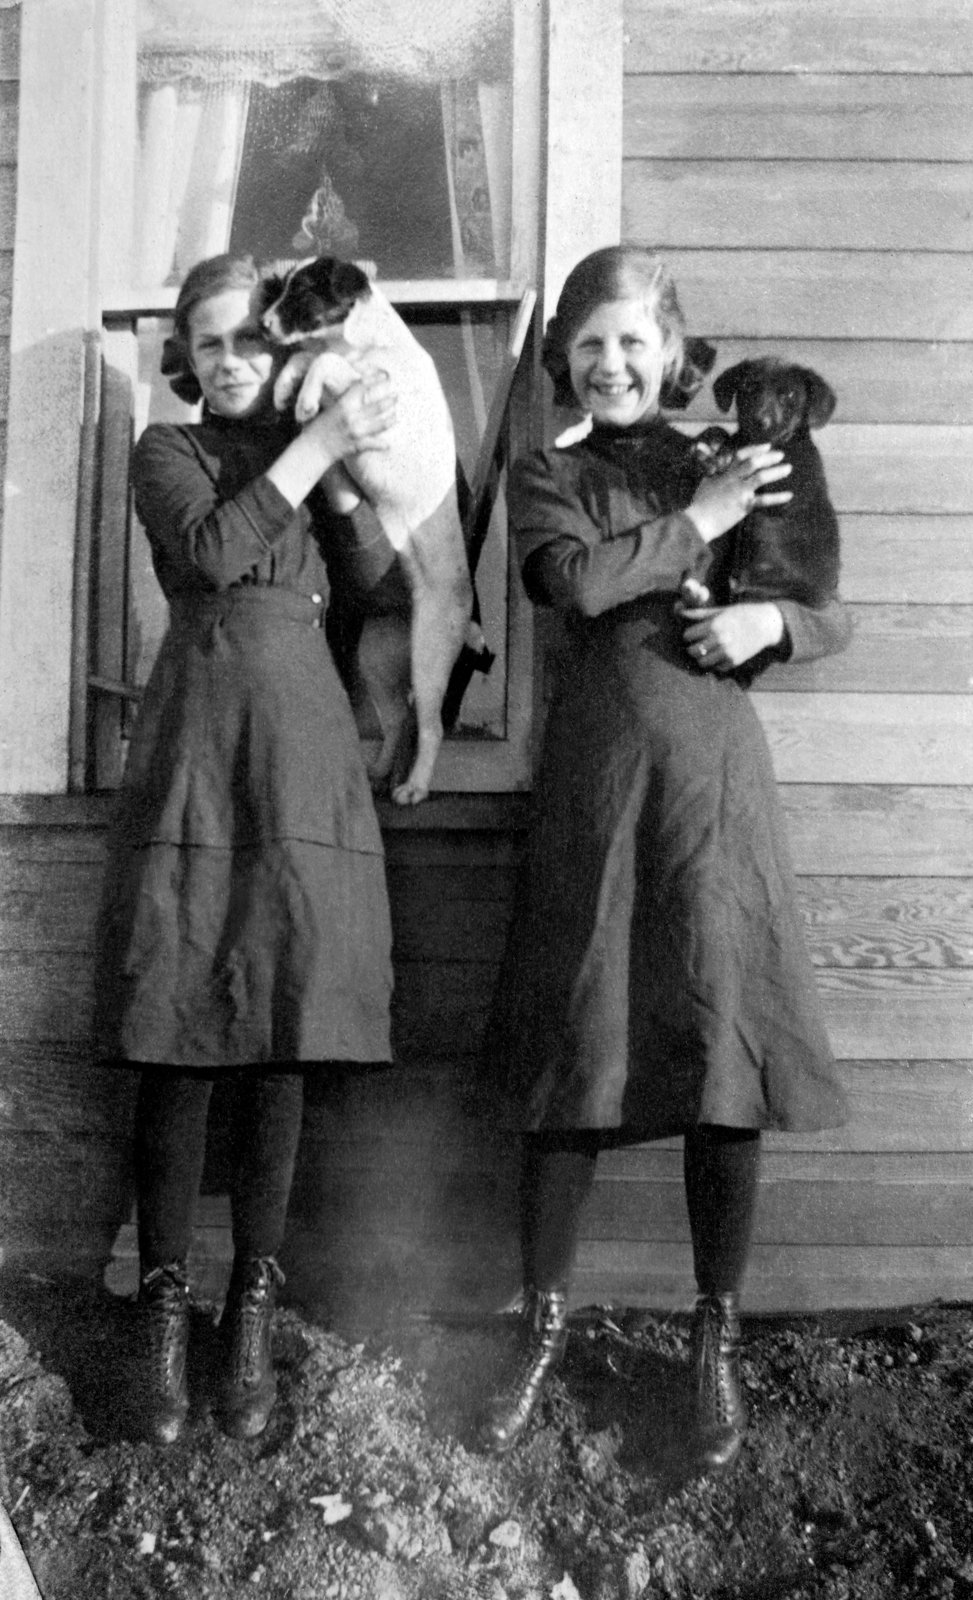 Elliot twin girls with dogs, c.1918.